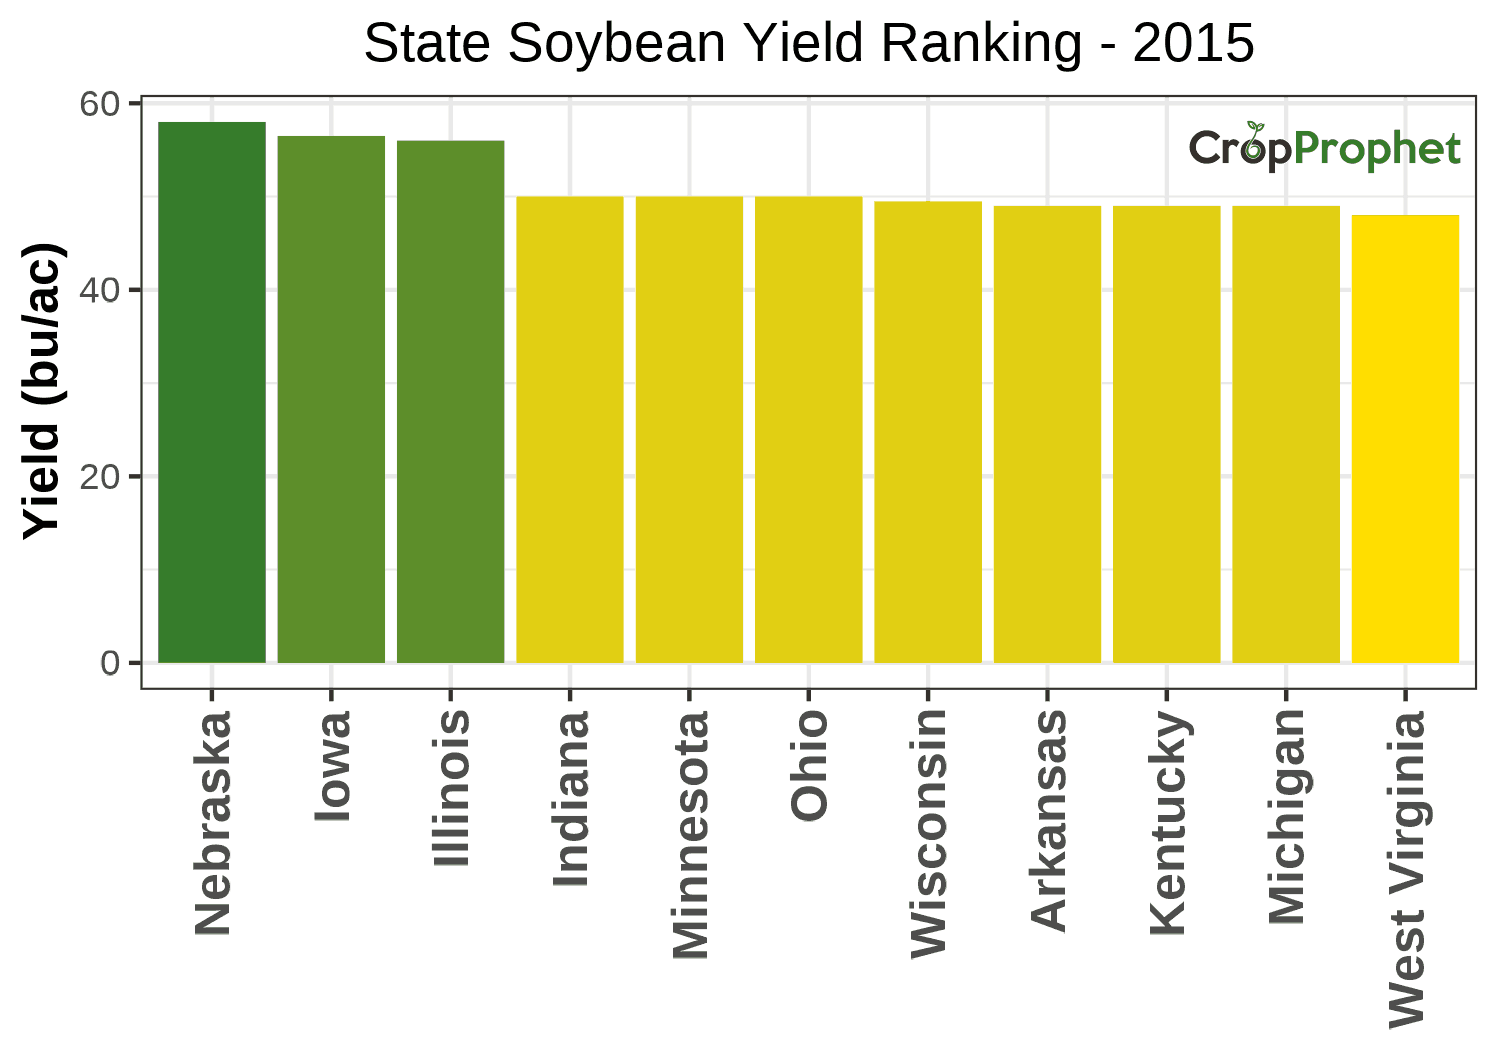 Soybean Production by State - 2015 Rankings